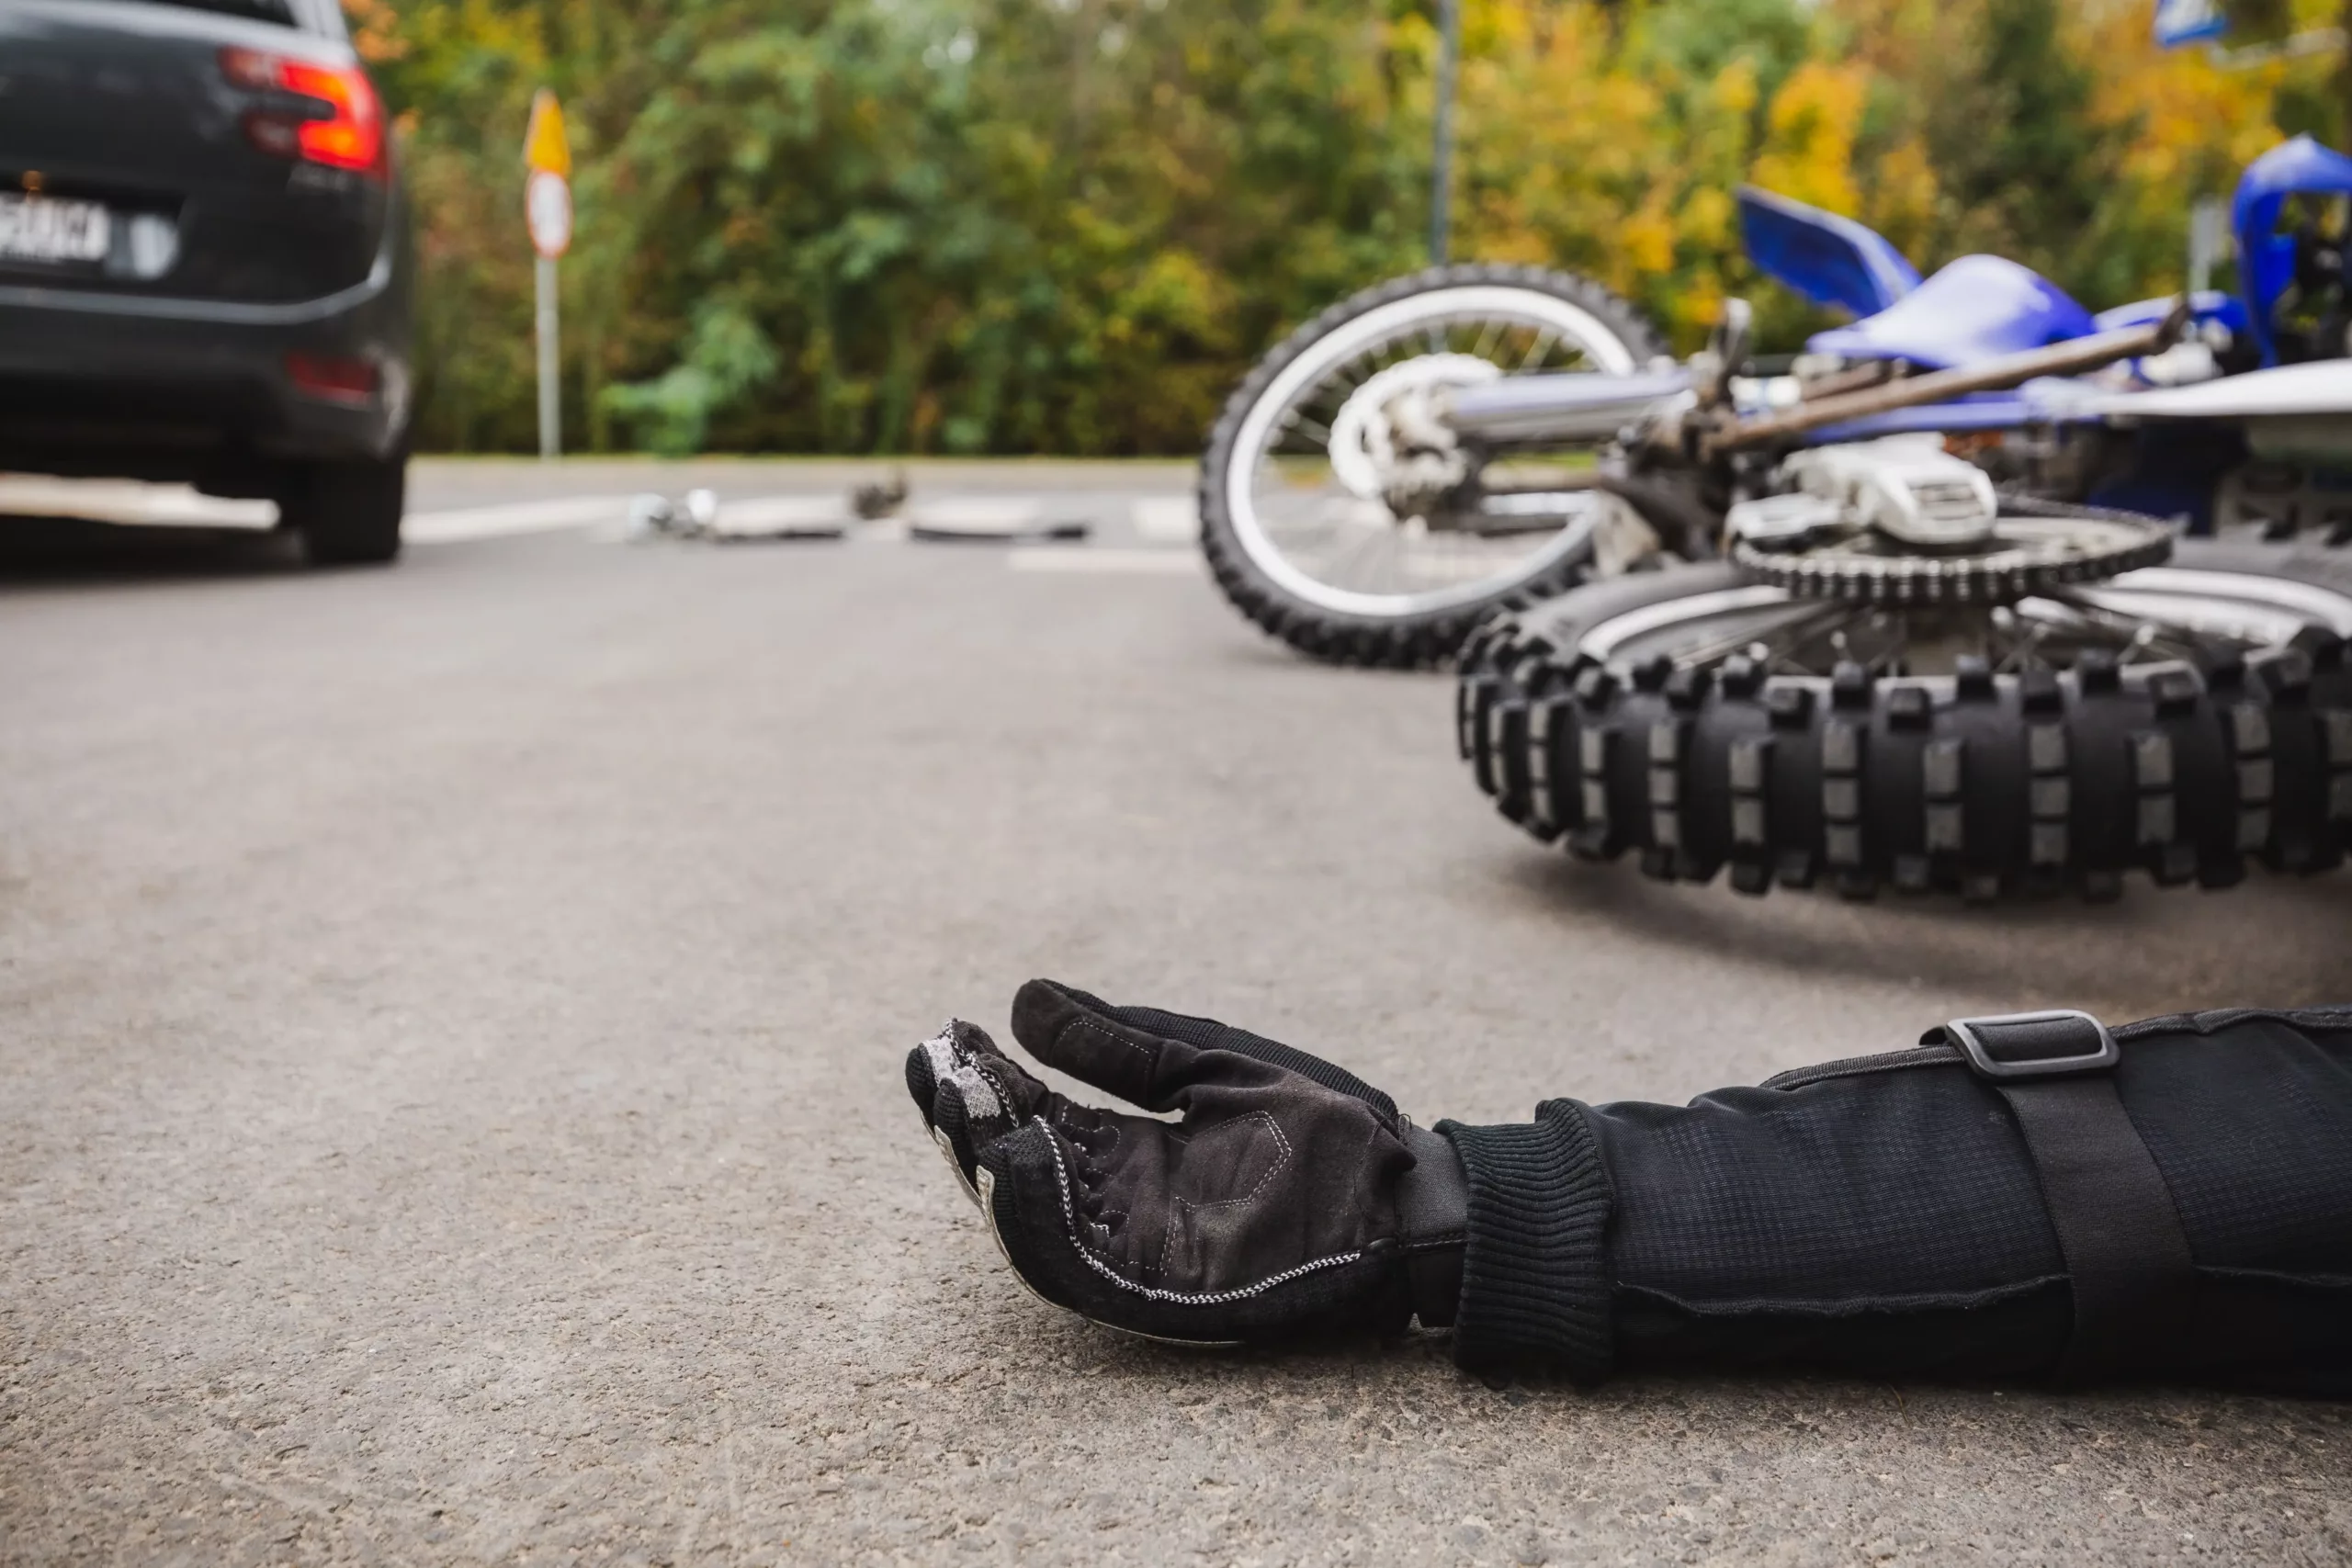 Receiving appropriate compensation for all your claims on the damages and injuries caused by your bike accident